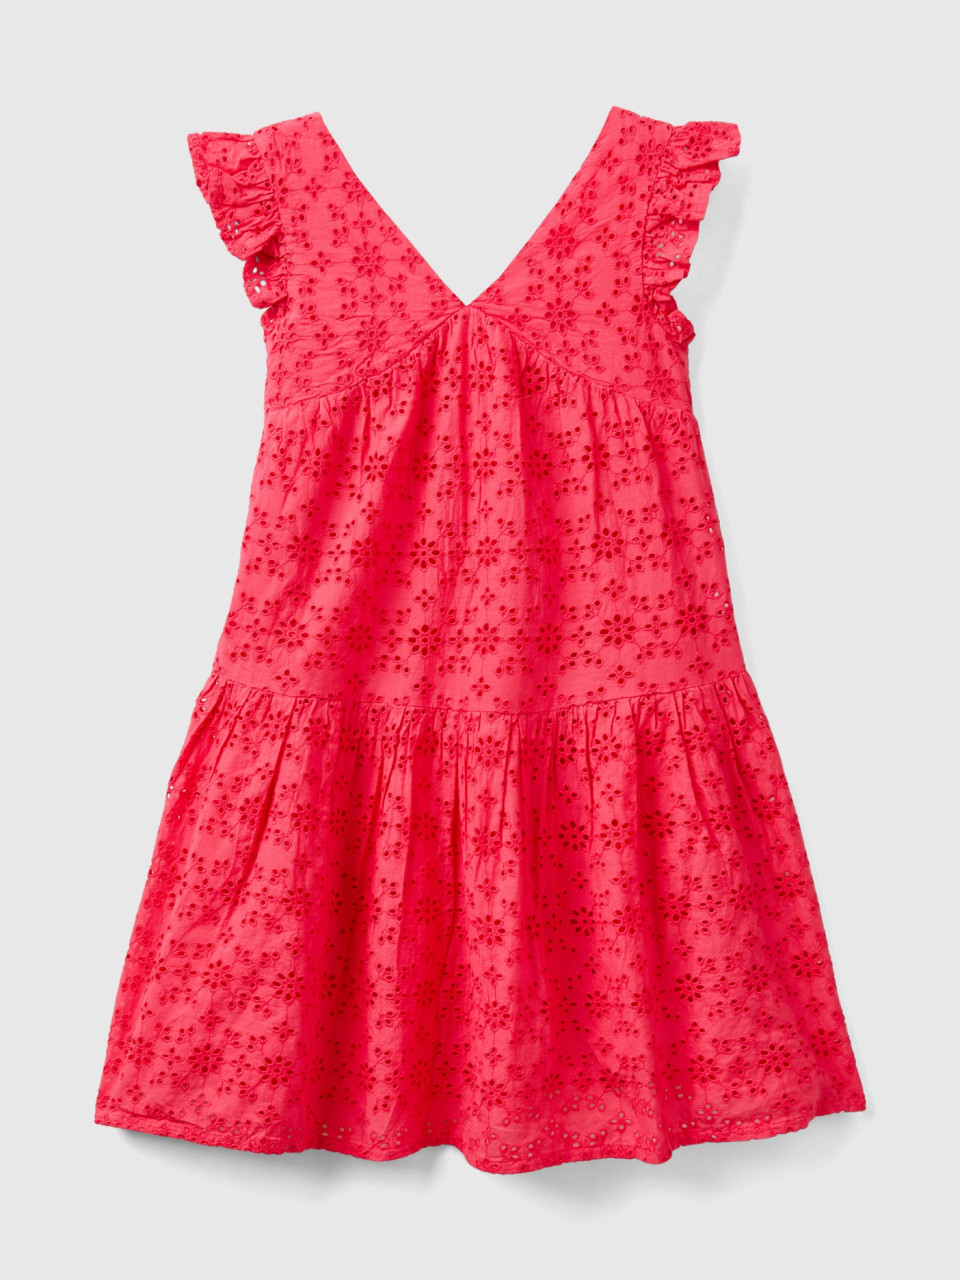 Benetton, Dress With Broderie Anglaise Embroidery, Fuchsia, Kids